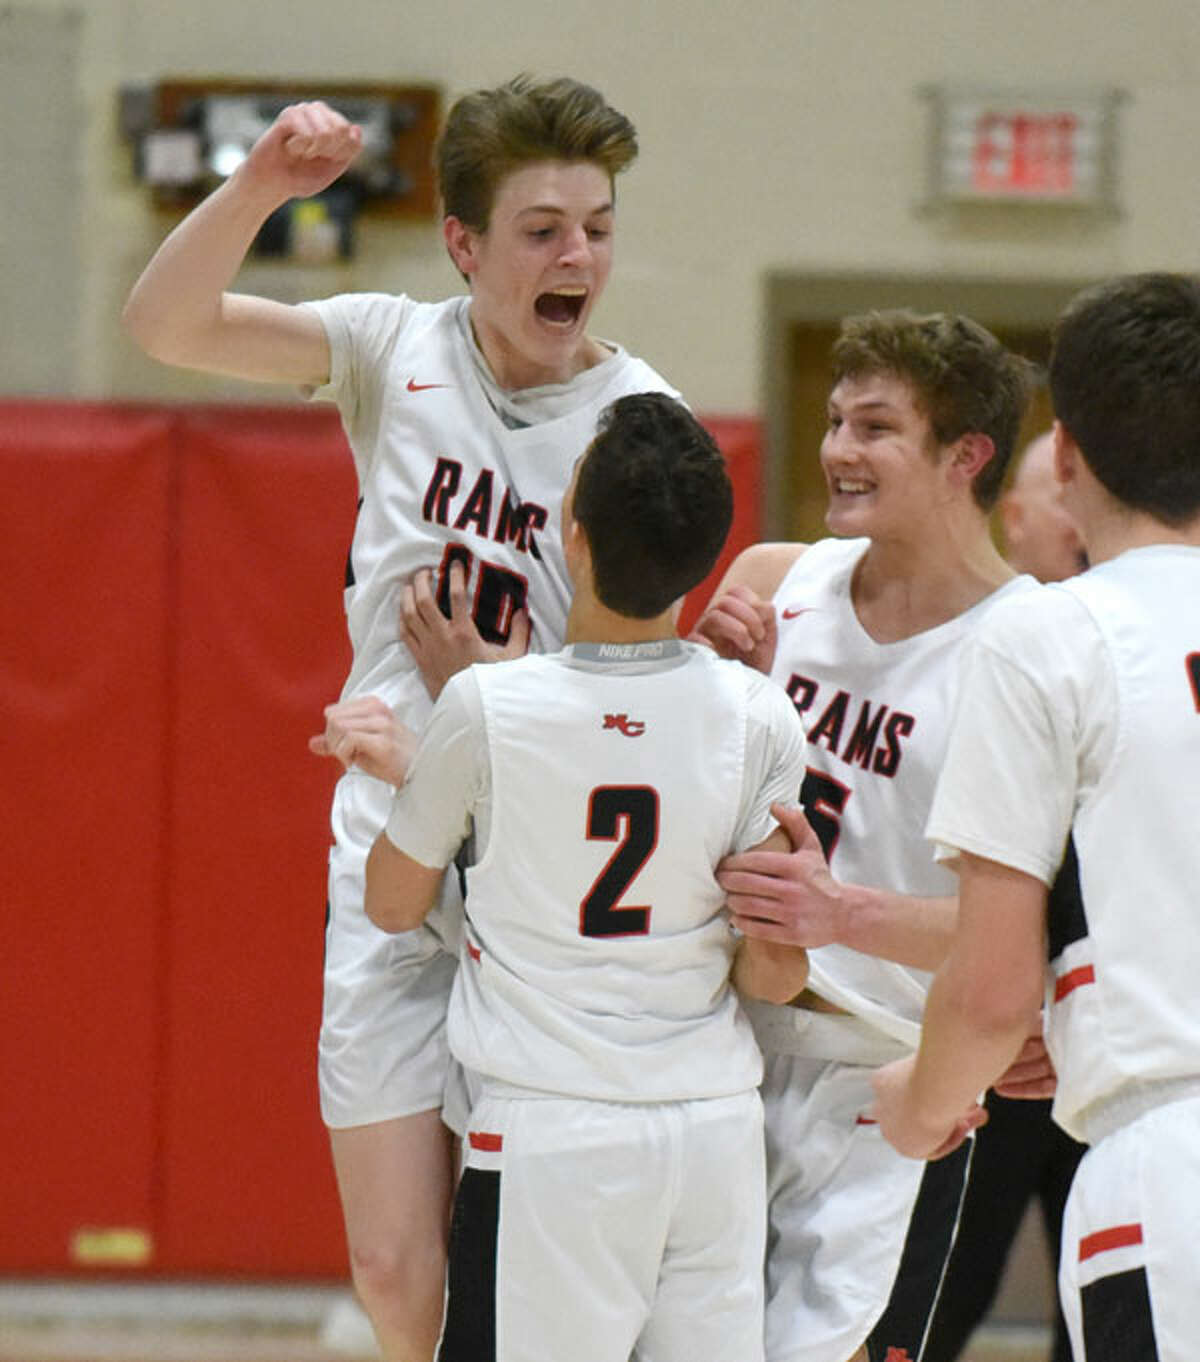 Ryan McAleer (10) and Alex Gibbens celebrate with Aaron Fishman (2) after Fishman hit three free throws to tie the score with 0.9 seconds remaining. — Dave Stewart/Hearst Connecticut Media